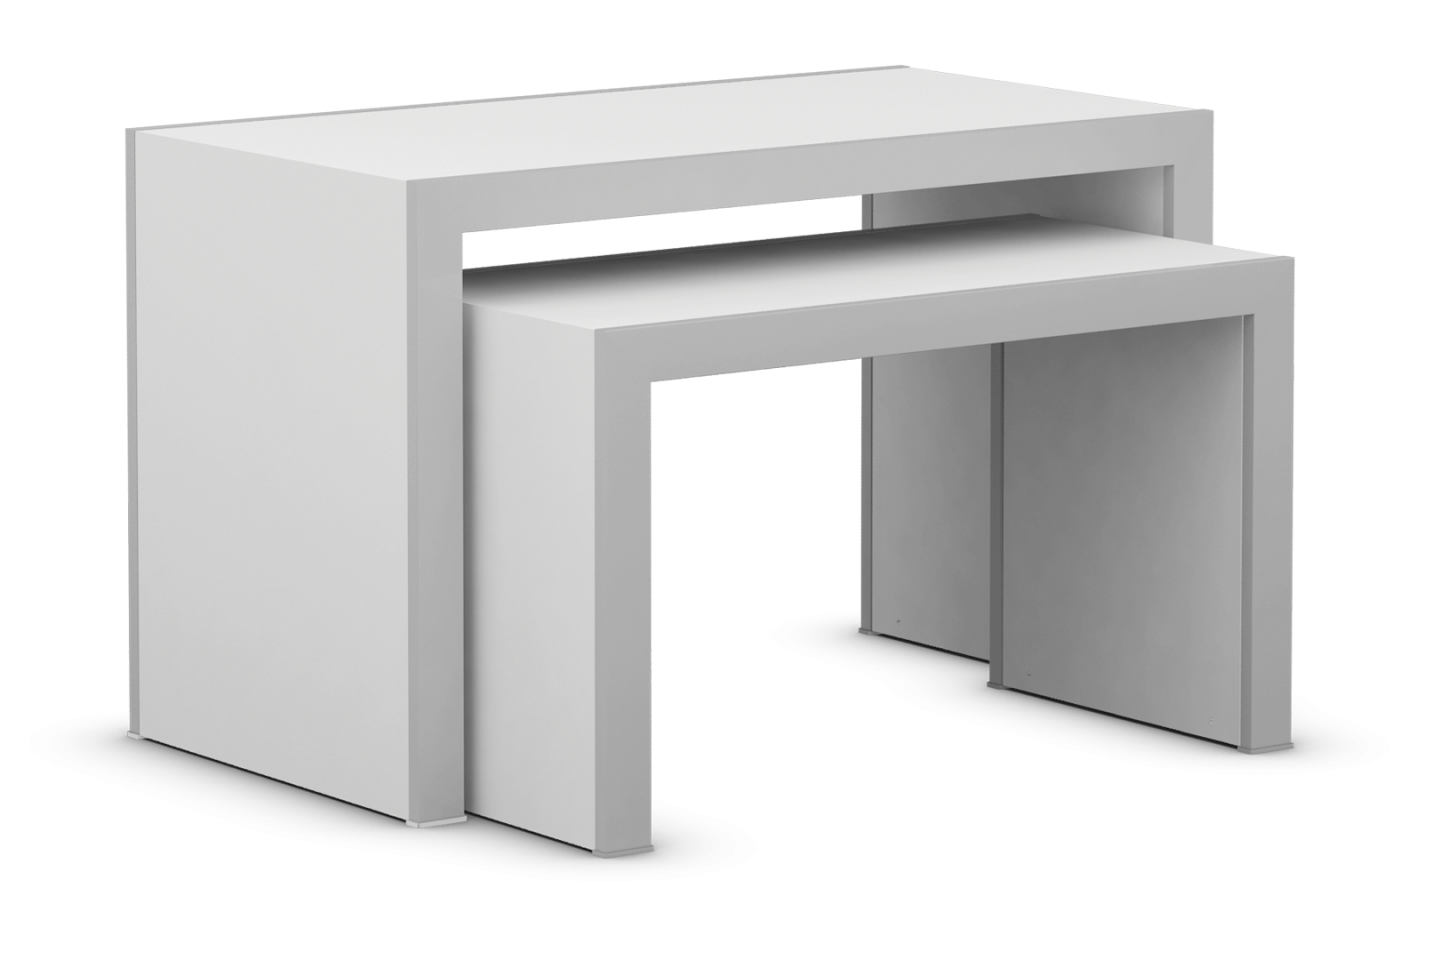 Edge Collection Metal Frame Table Set with Laminated Tops and Sides